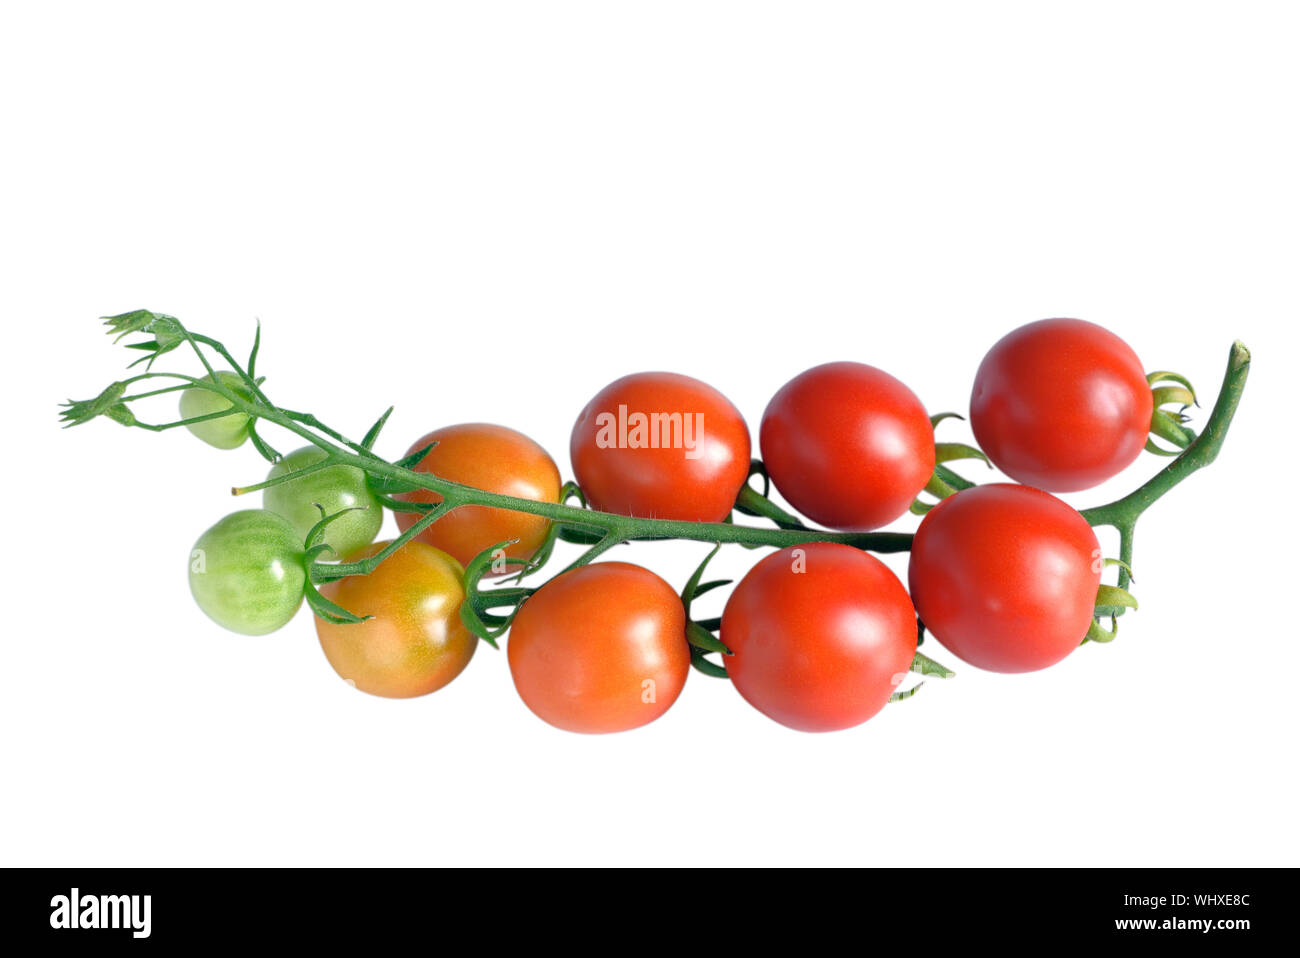 Branch of cherry tomatoes with ripe, unripe and green fruits, isolated on white Stock Photo